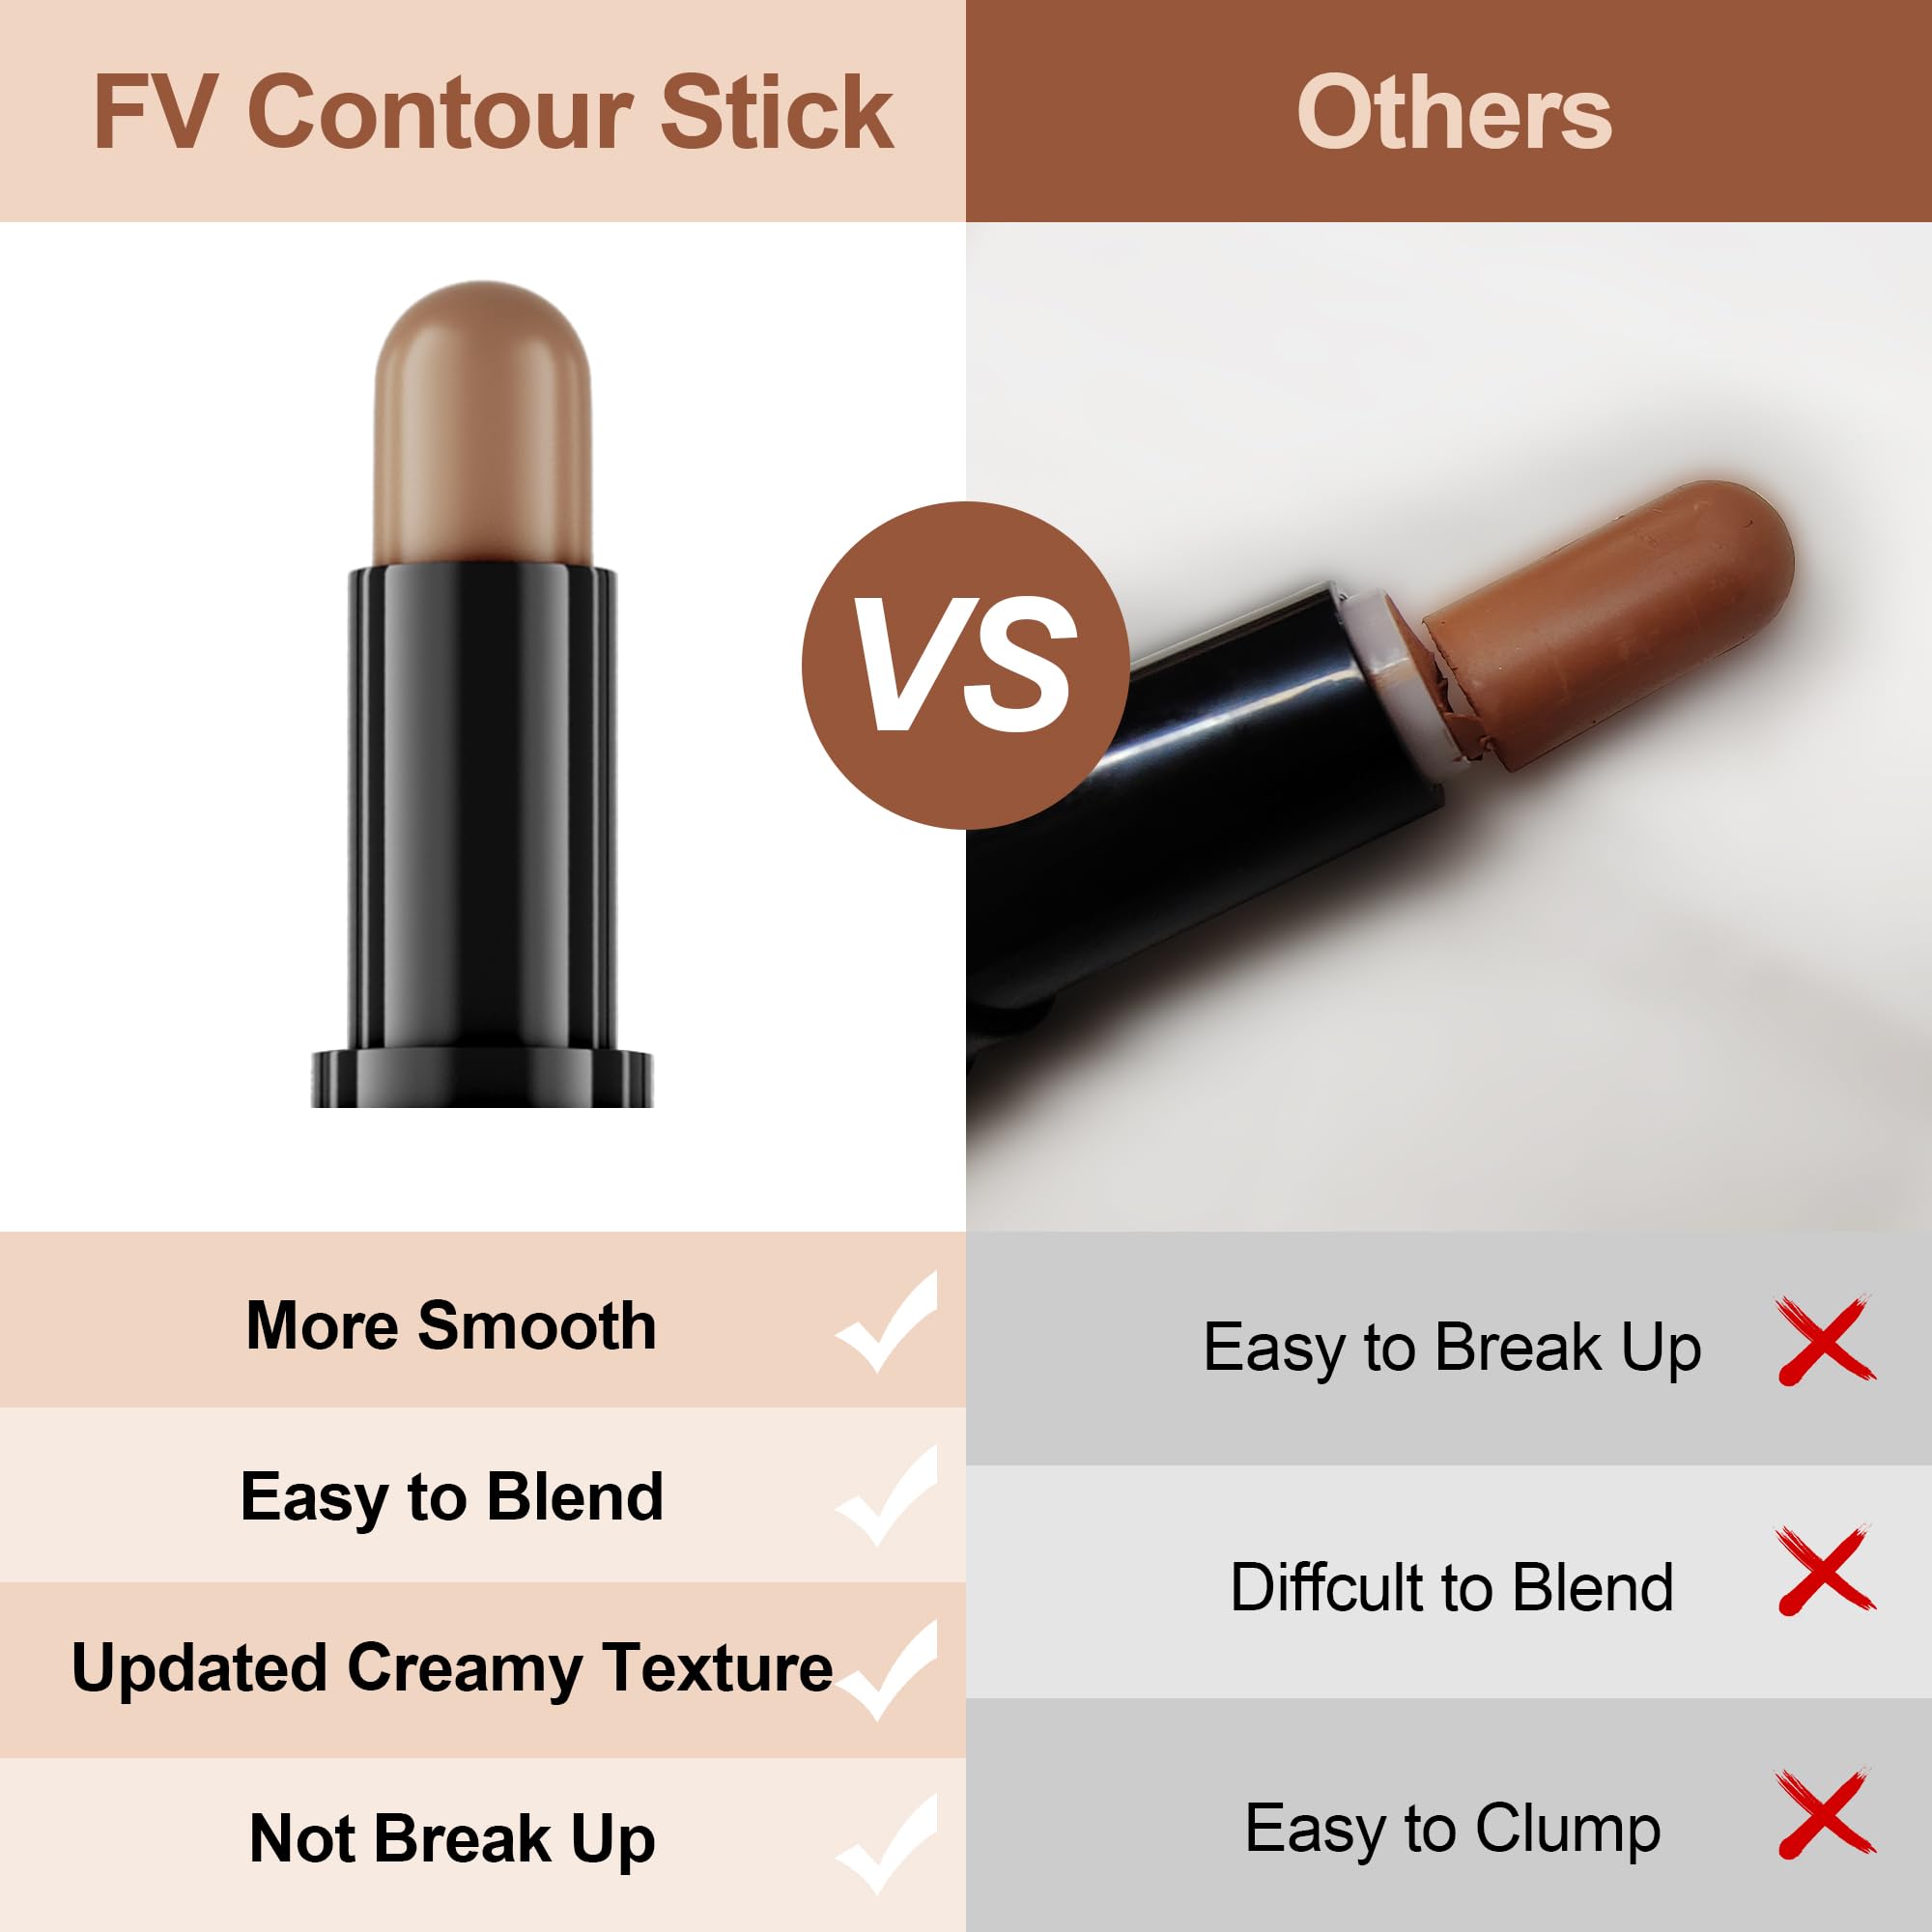 FV Cream Contour Stick, 2-in-1 Face Shaping Stick for Highlighting & Contouring, Bronzer Stick，Long Lasting & Waterproof，Non-Sticky Highlighter Makeup Pen for Light/Medium Skin Tones, 0.26oz (7.5g)